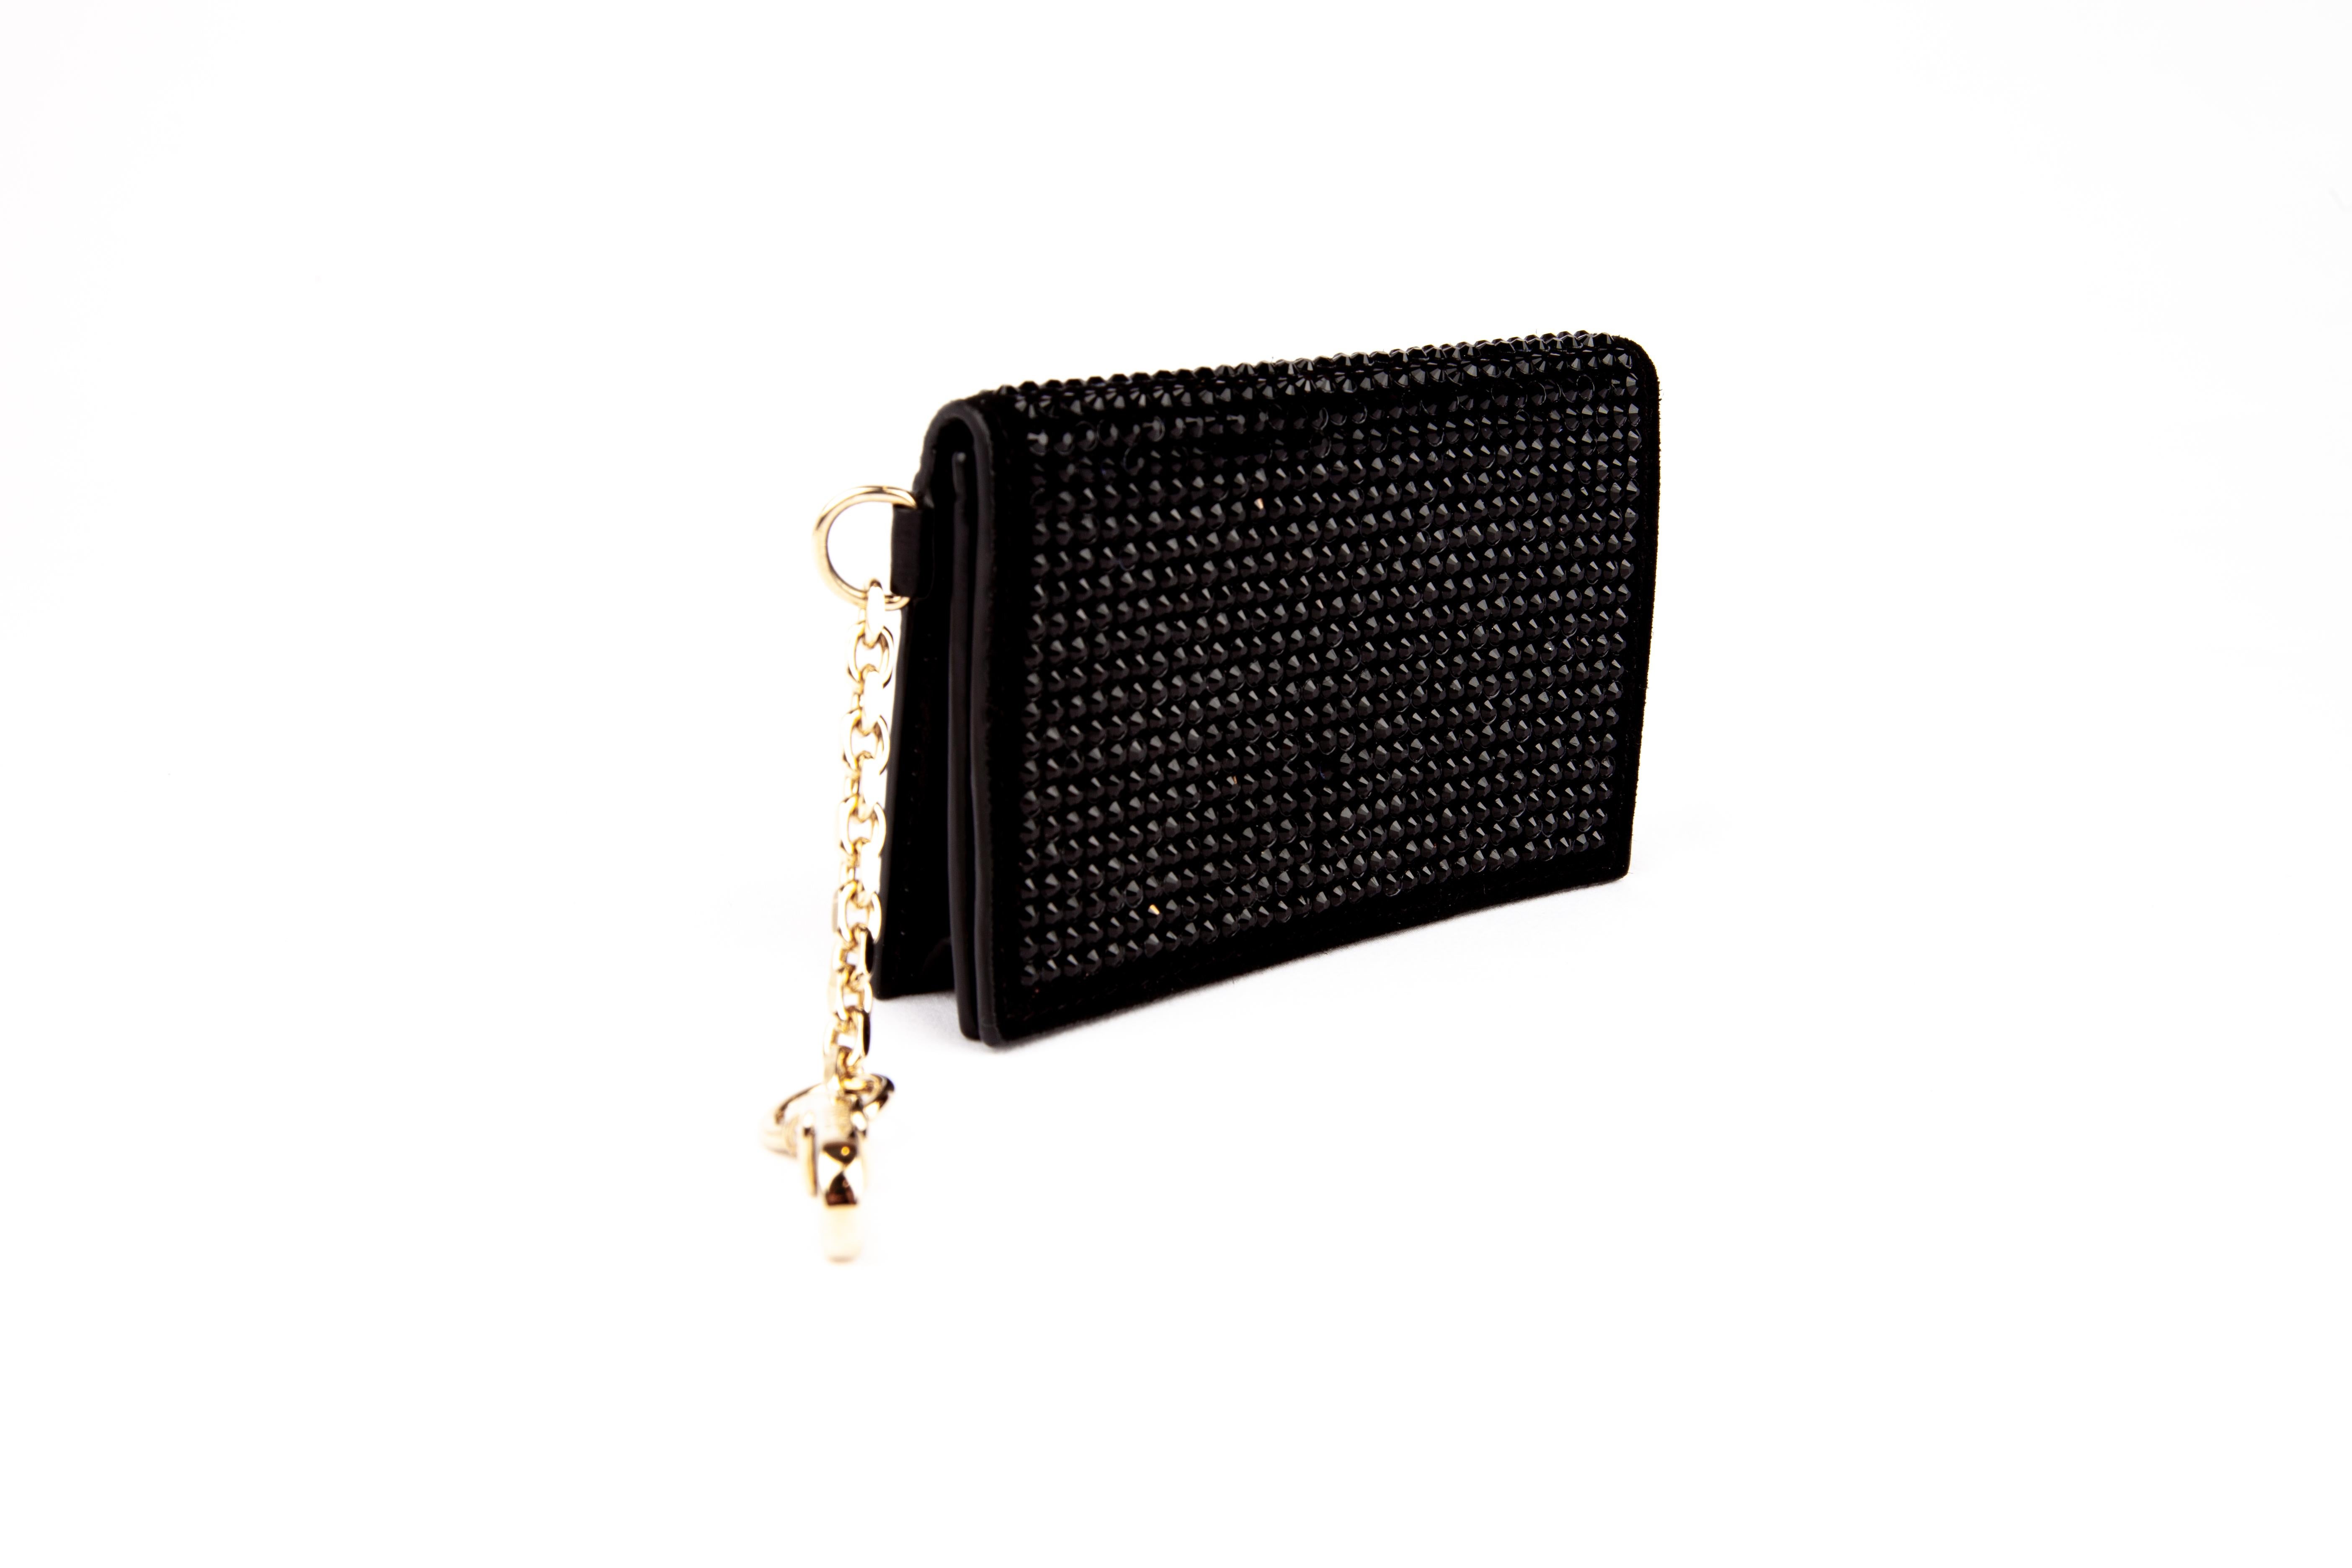 This Versace mini wallet / bag charm features black crystal embellishments, black suede and smooth leather, a snap fastening, two inside pockets, and gold tone hardware. It can be used as a card holder or can hook onto a handbag as as cute and fun